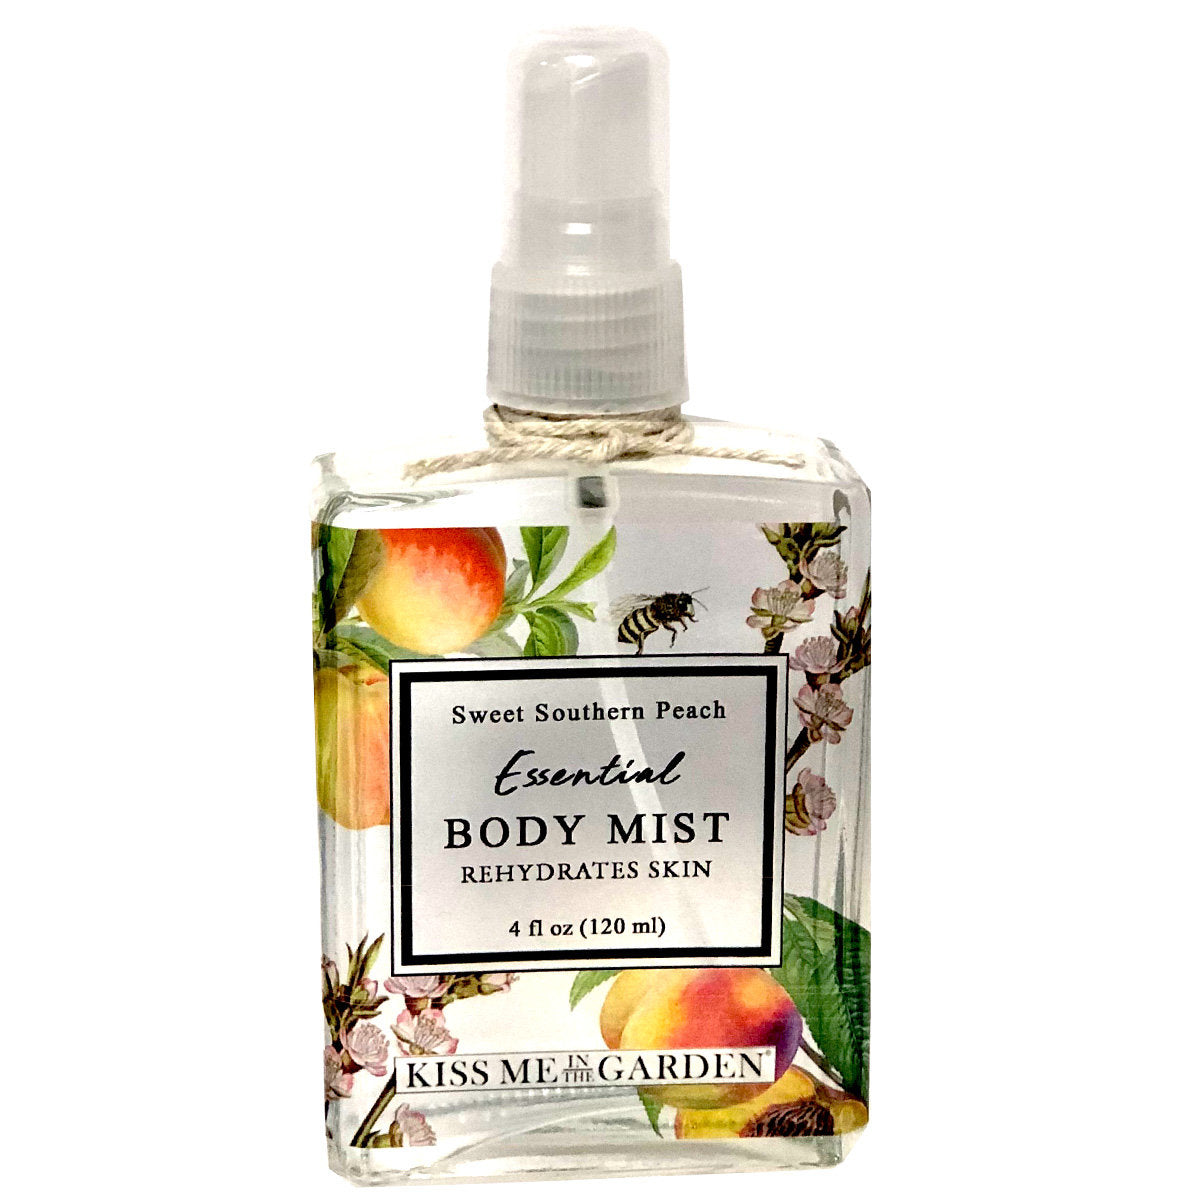 KISS ME IN THE GARDEN SWEET SOUTHERN PEACH BODY MIST